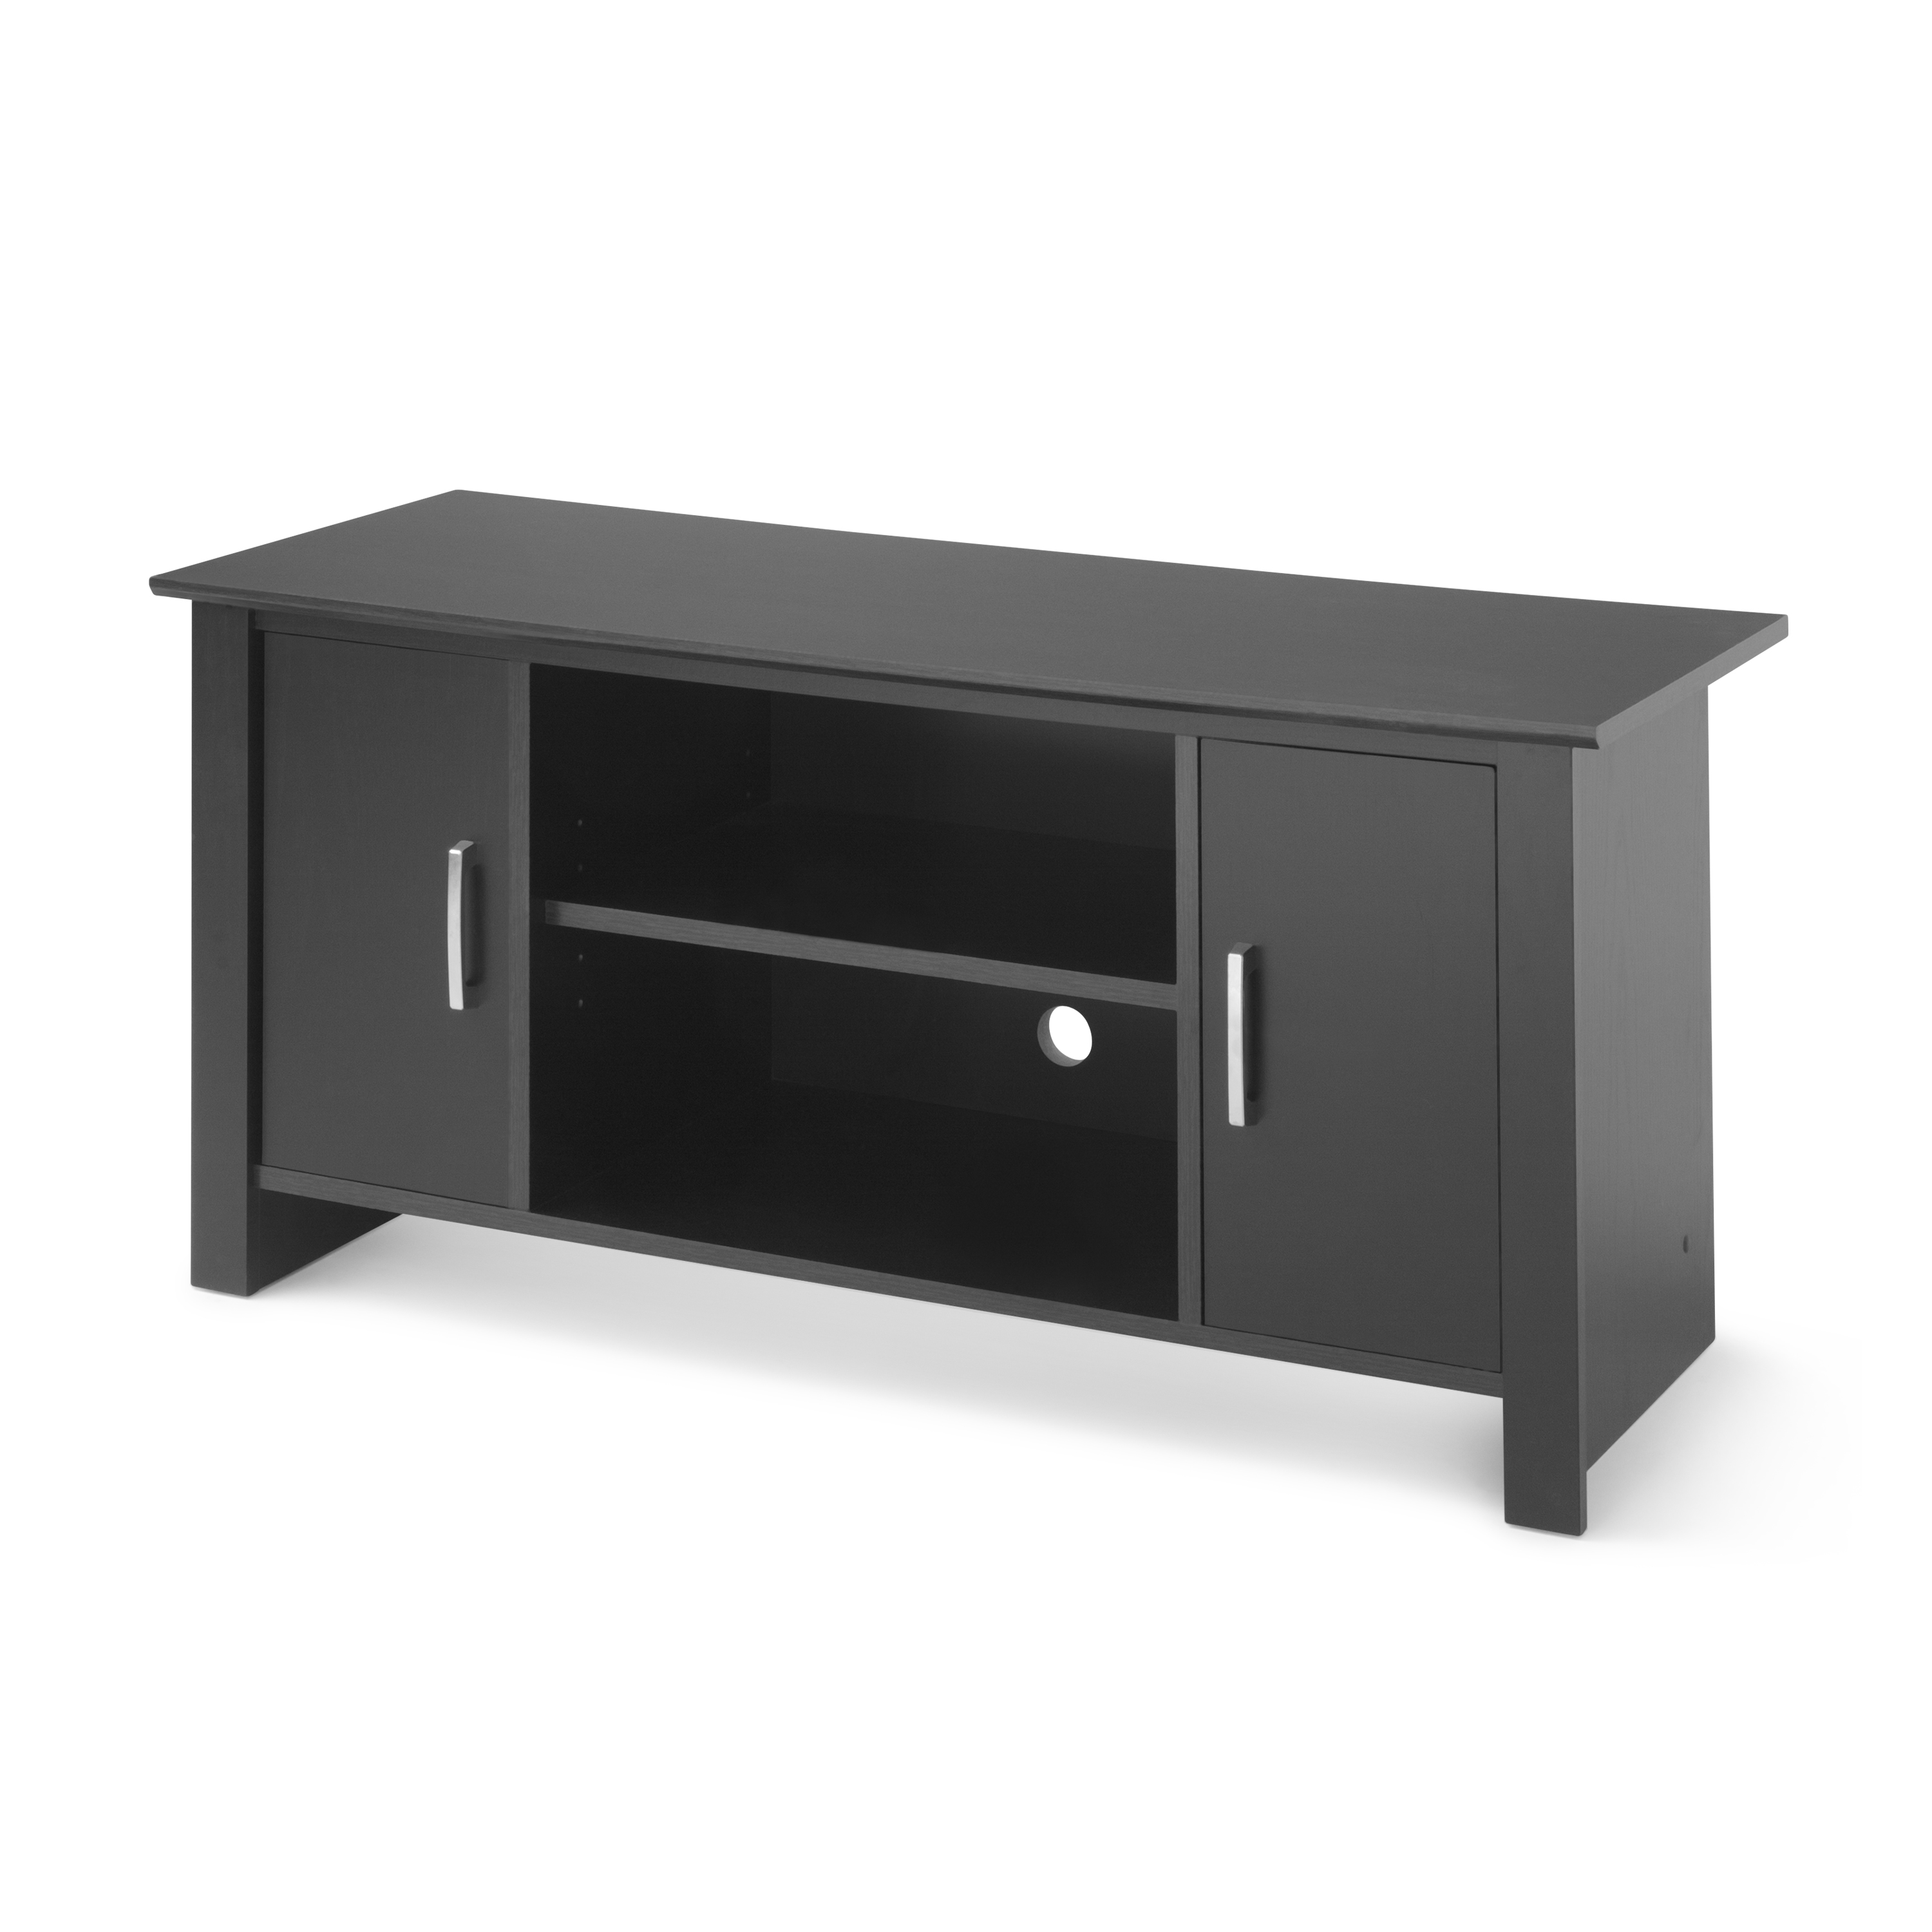 Mainstays TV Stand for Flat Screen TVs up to 47", Blackwood Finish - image 1 of 5